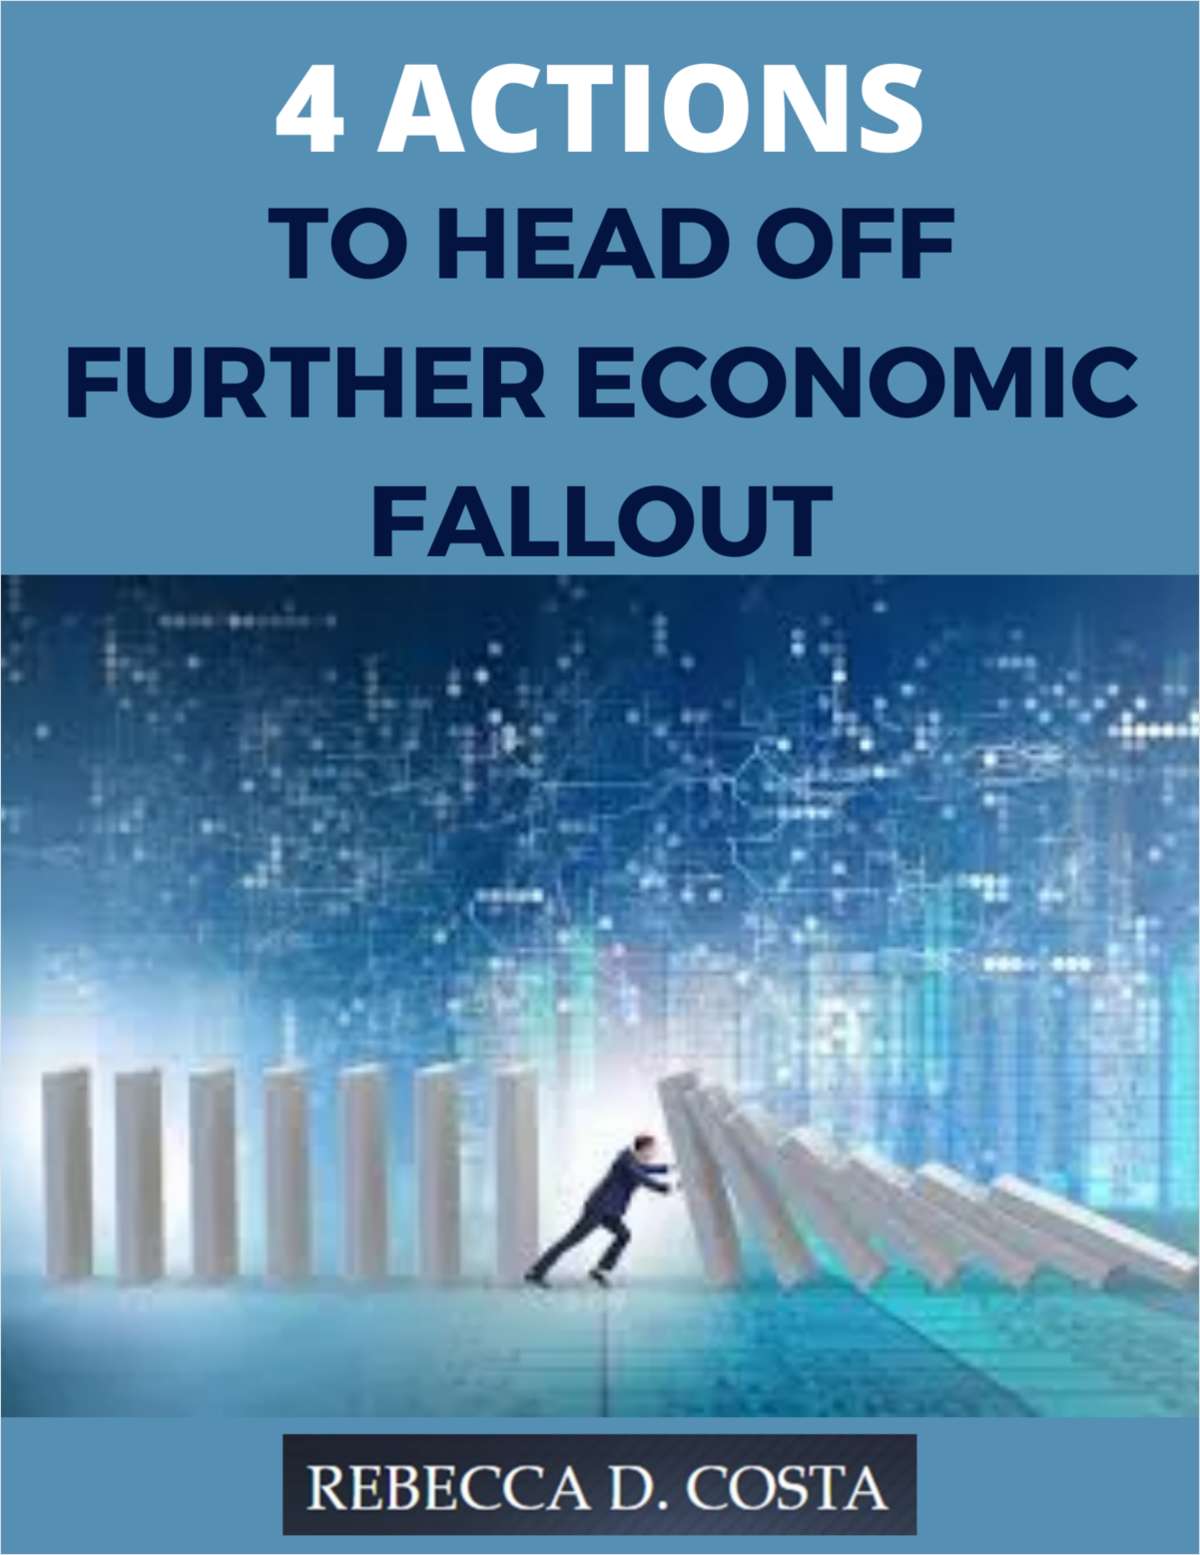 4 Actions to Head Off Further Economic Fallout